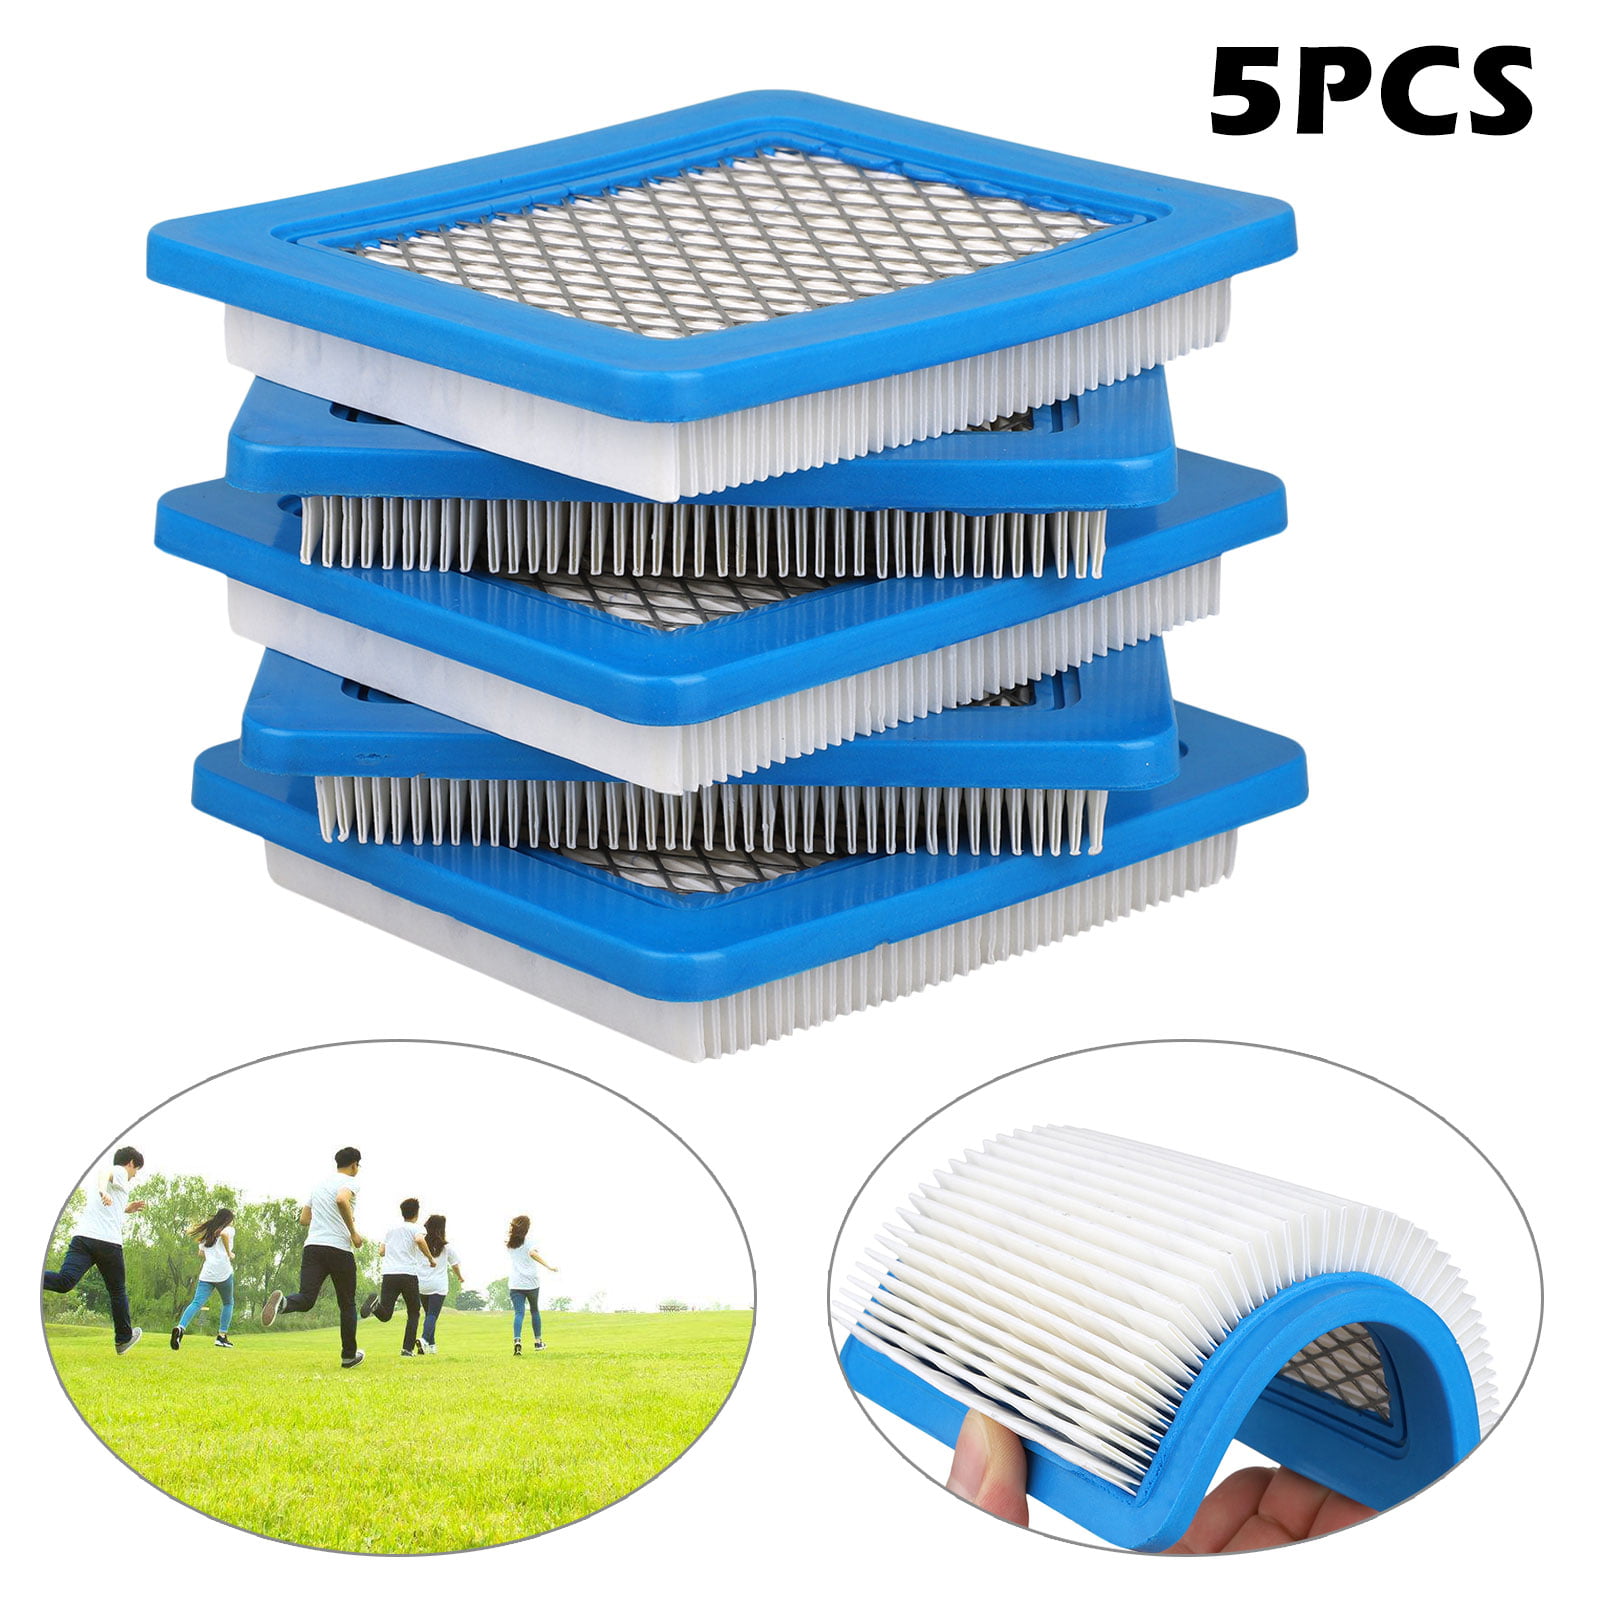 5PCS Air Filters Replacement For Briggs & Stratton 491588 491588S 5043 5043D 